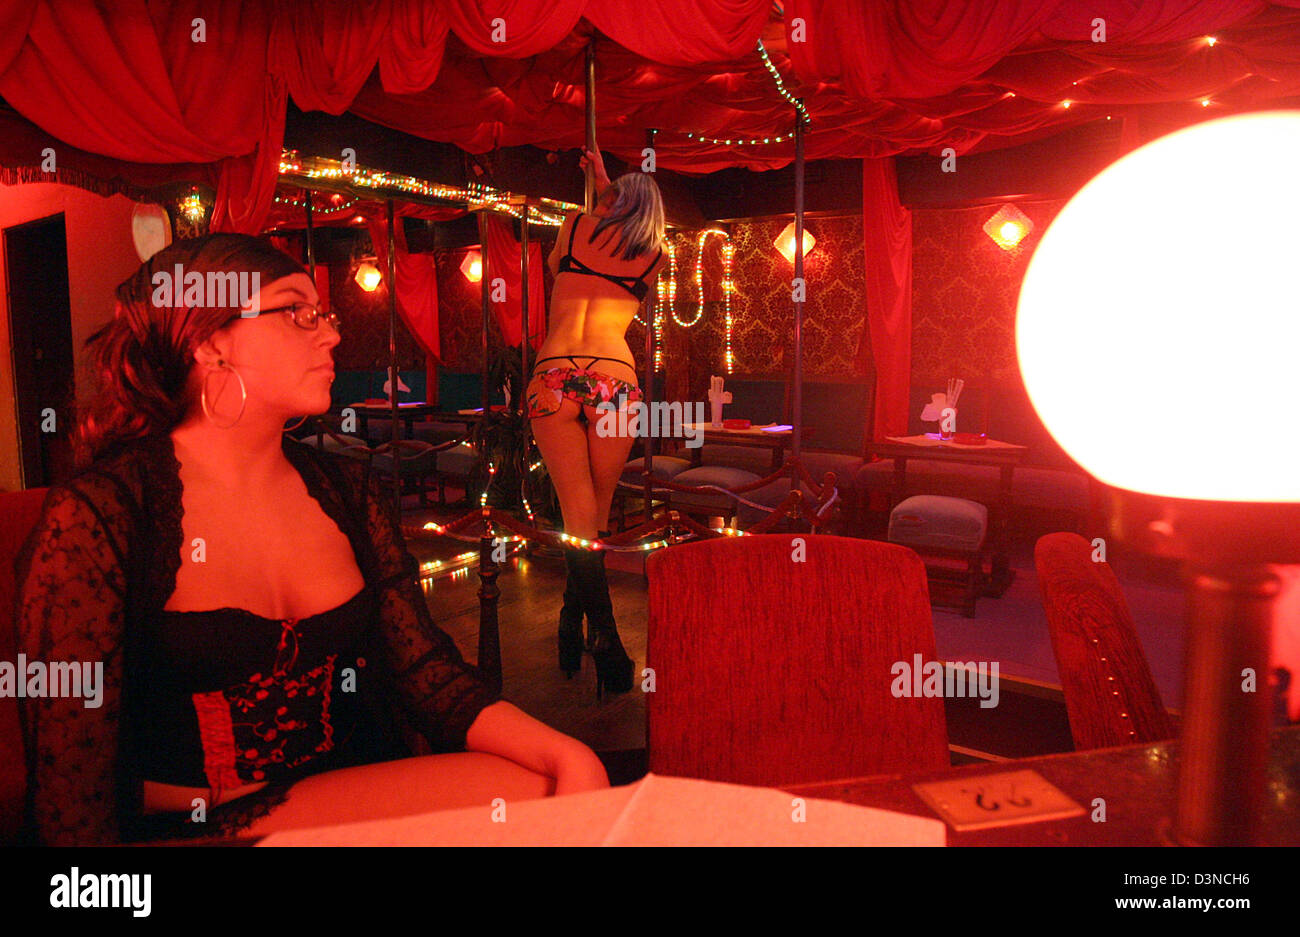 A young woman dances in a red lit tabledance club located on the Reeperbahn amusement street in Hamburg, Germany, Tuesday night, 28 March 2006. The famous Reeperbahn is considered the longest amusement street in the world. Photo: Kay Nietfeld Stock Photo